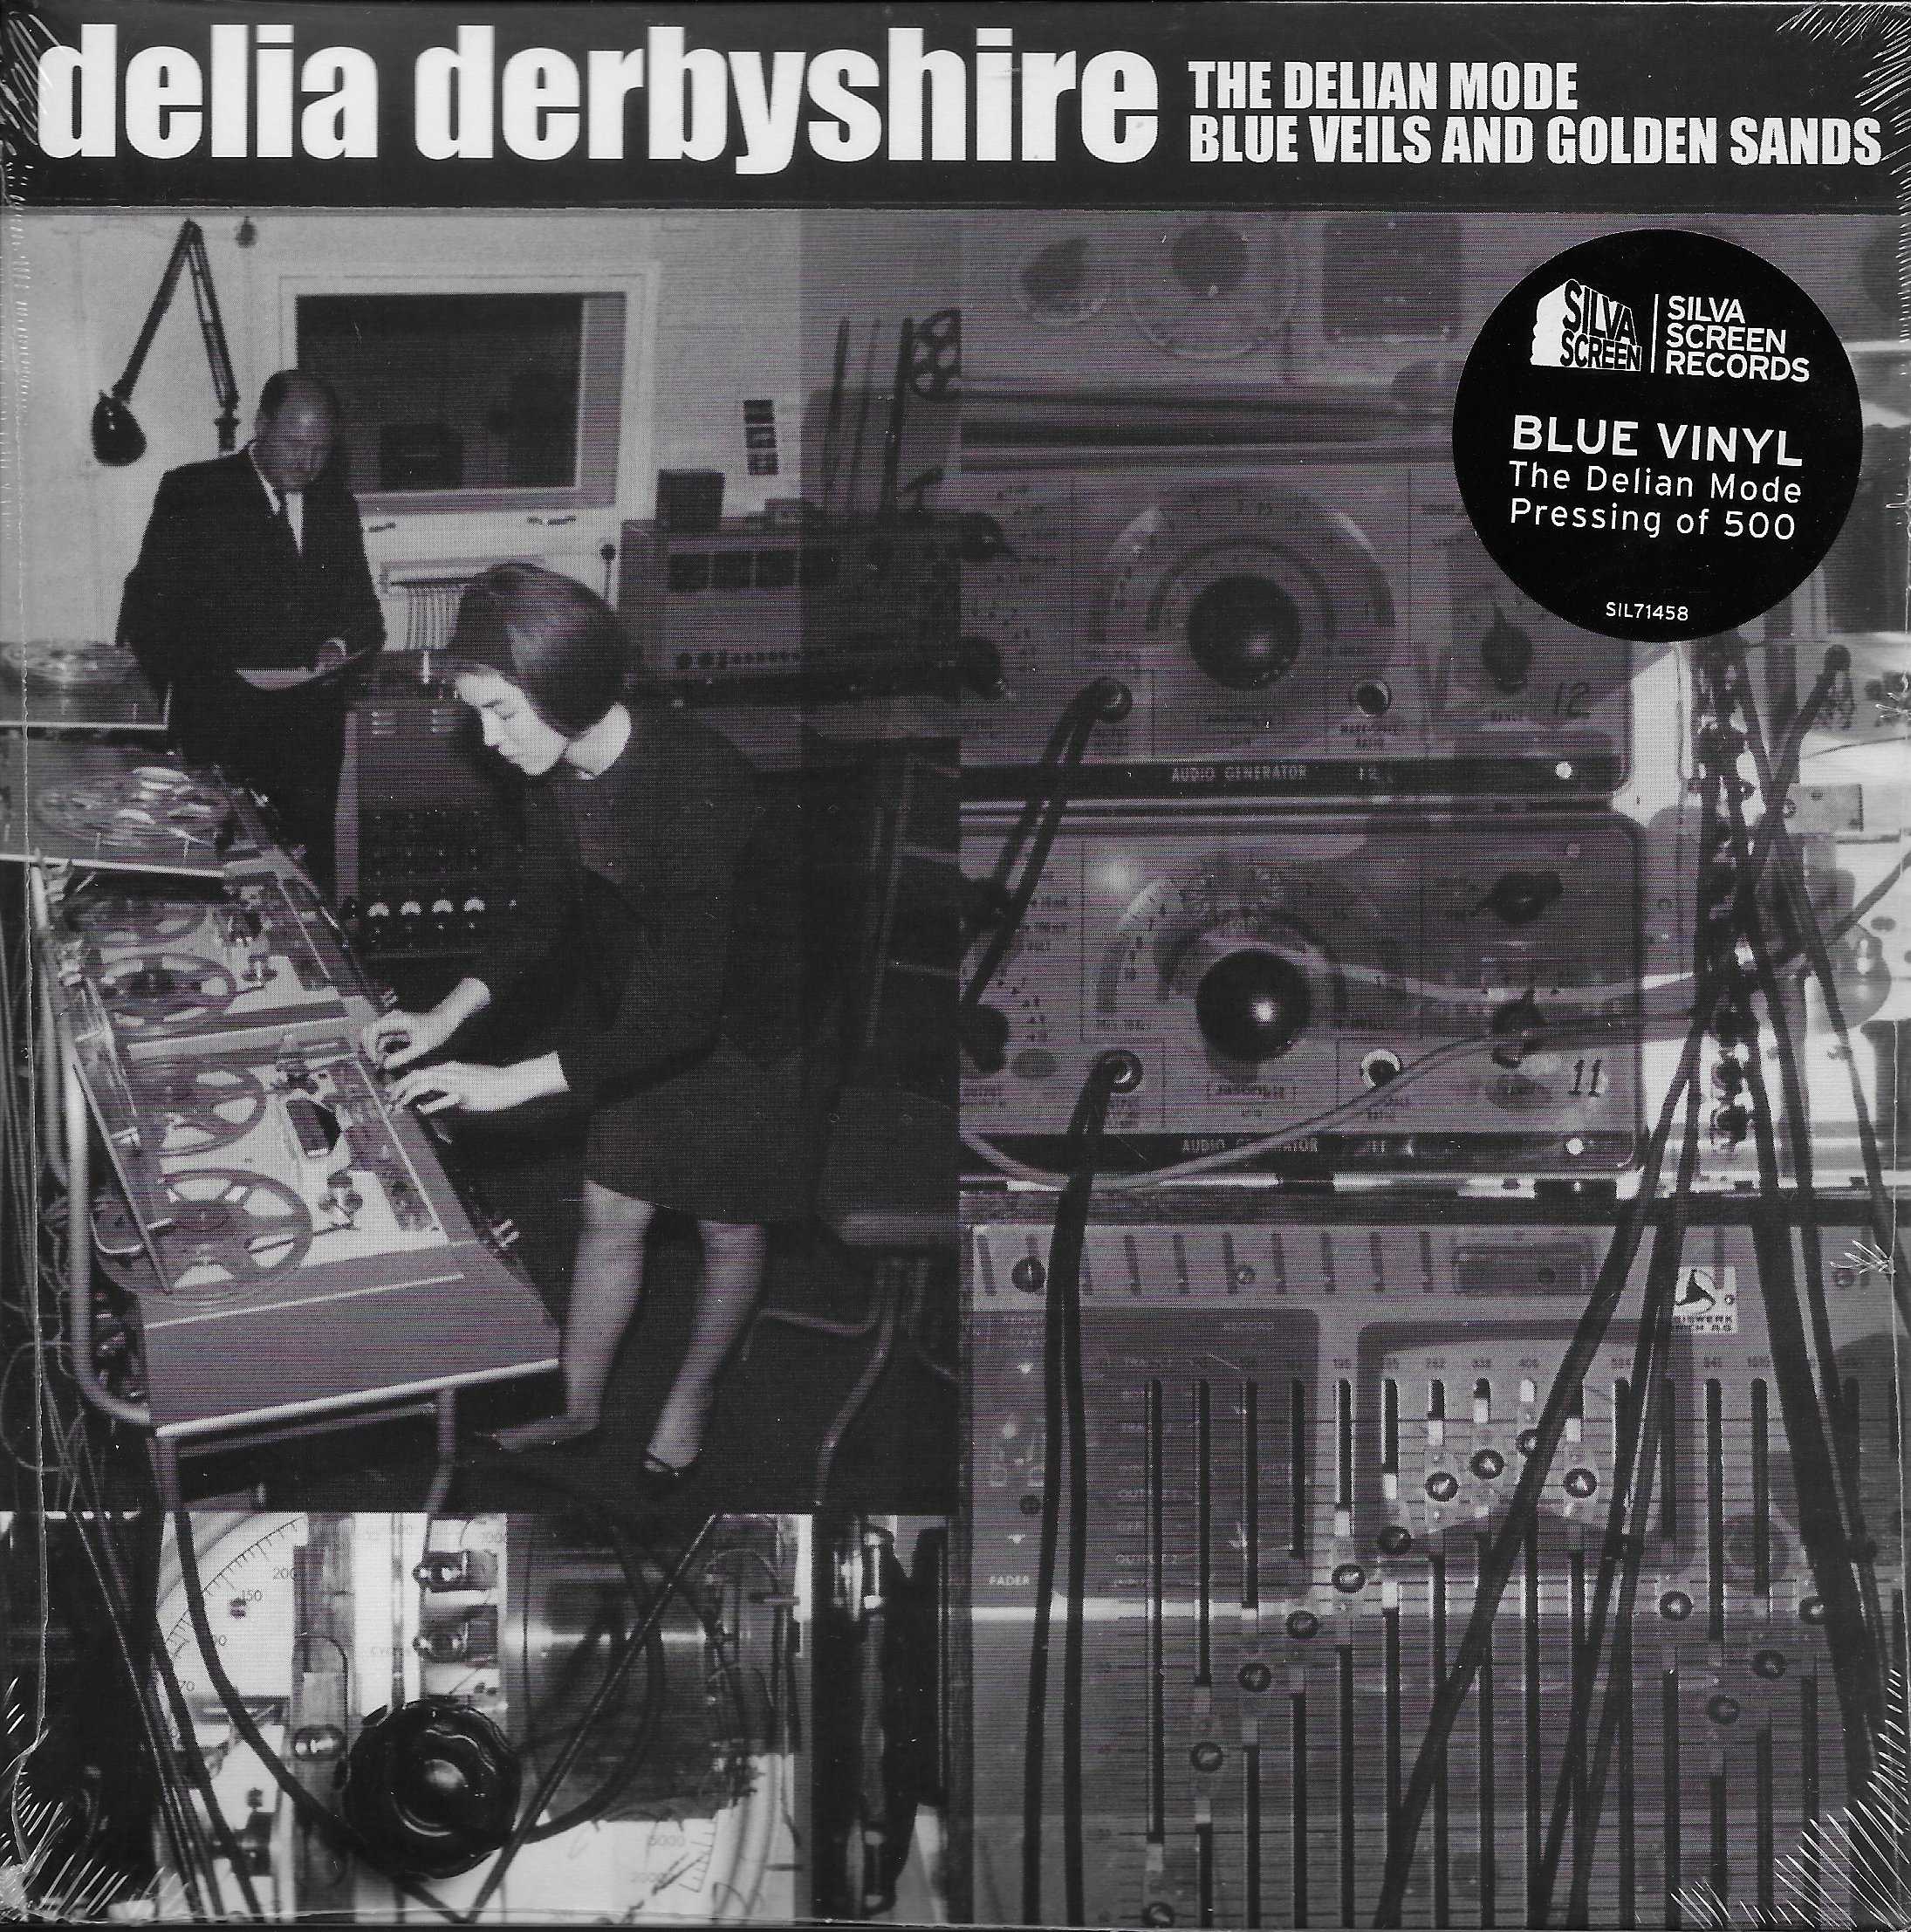 Picture of The Delian Mode by artist Delia Derbyshire from the BBC singles - Records and Tapes library